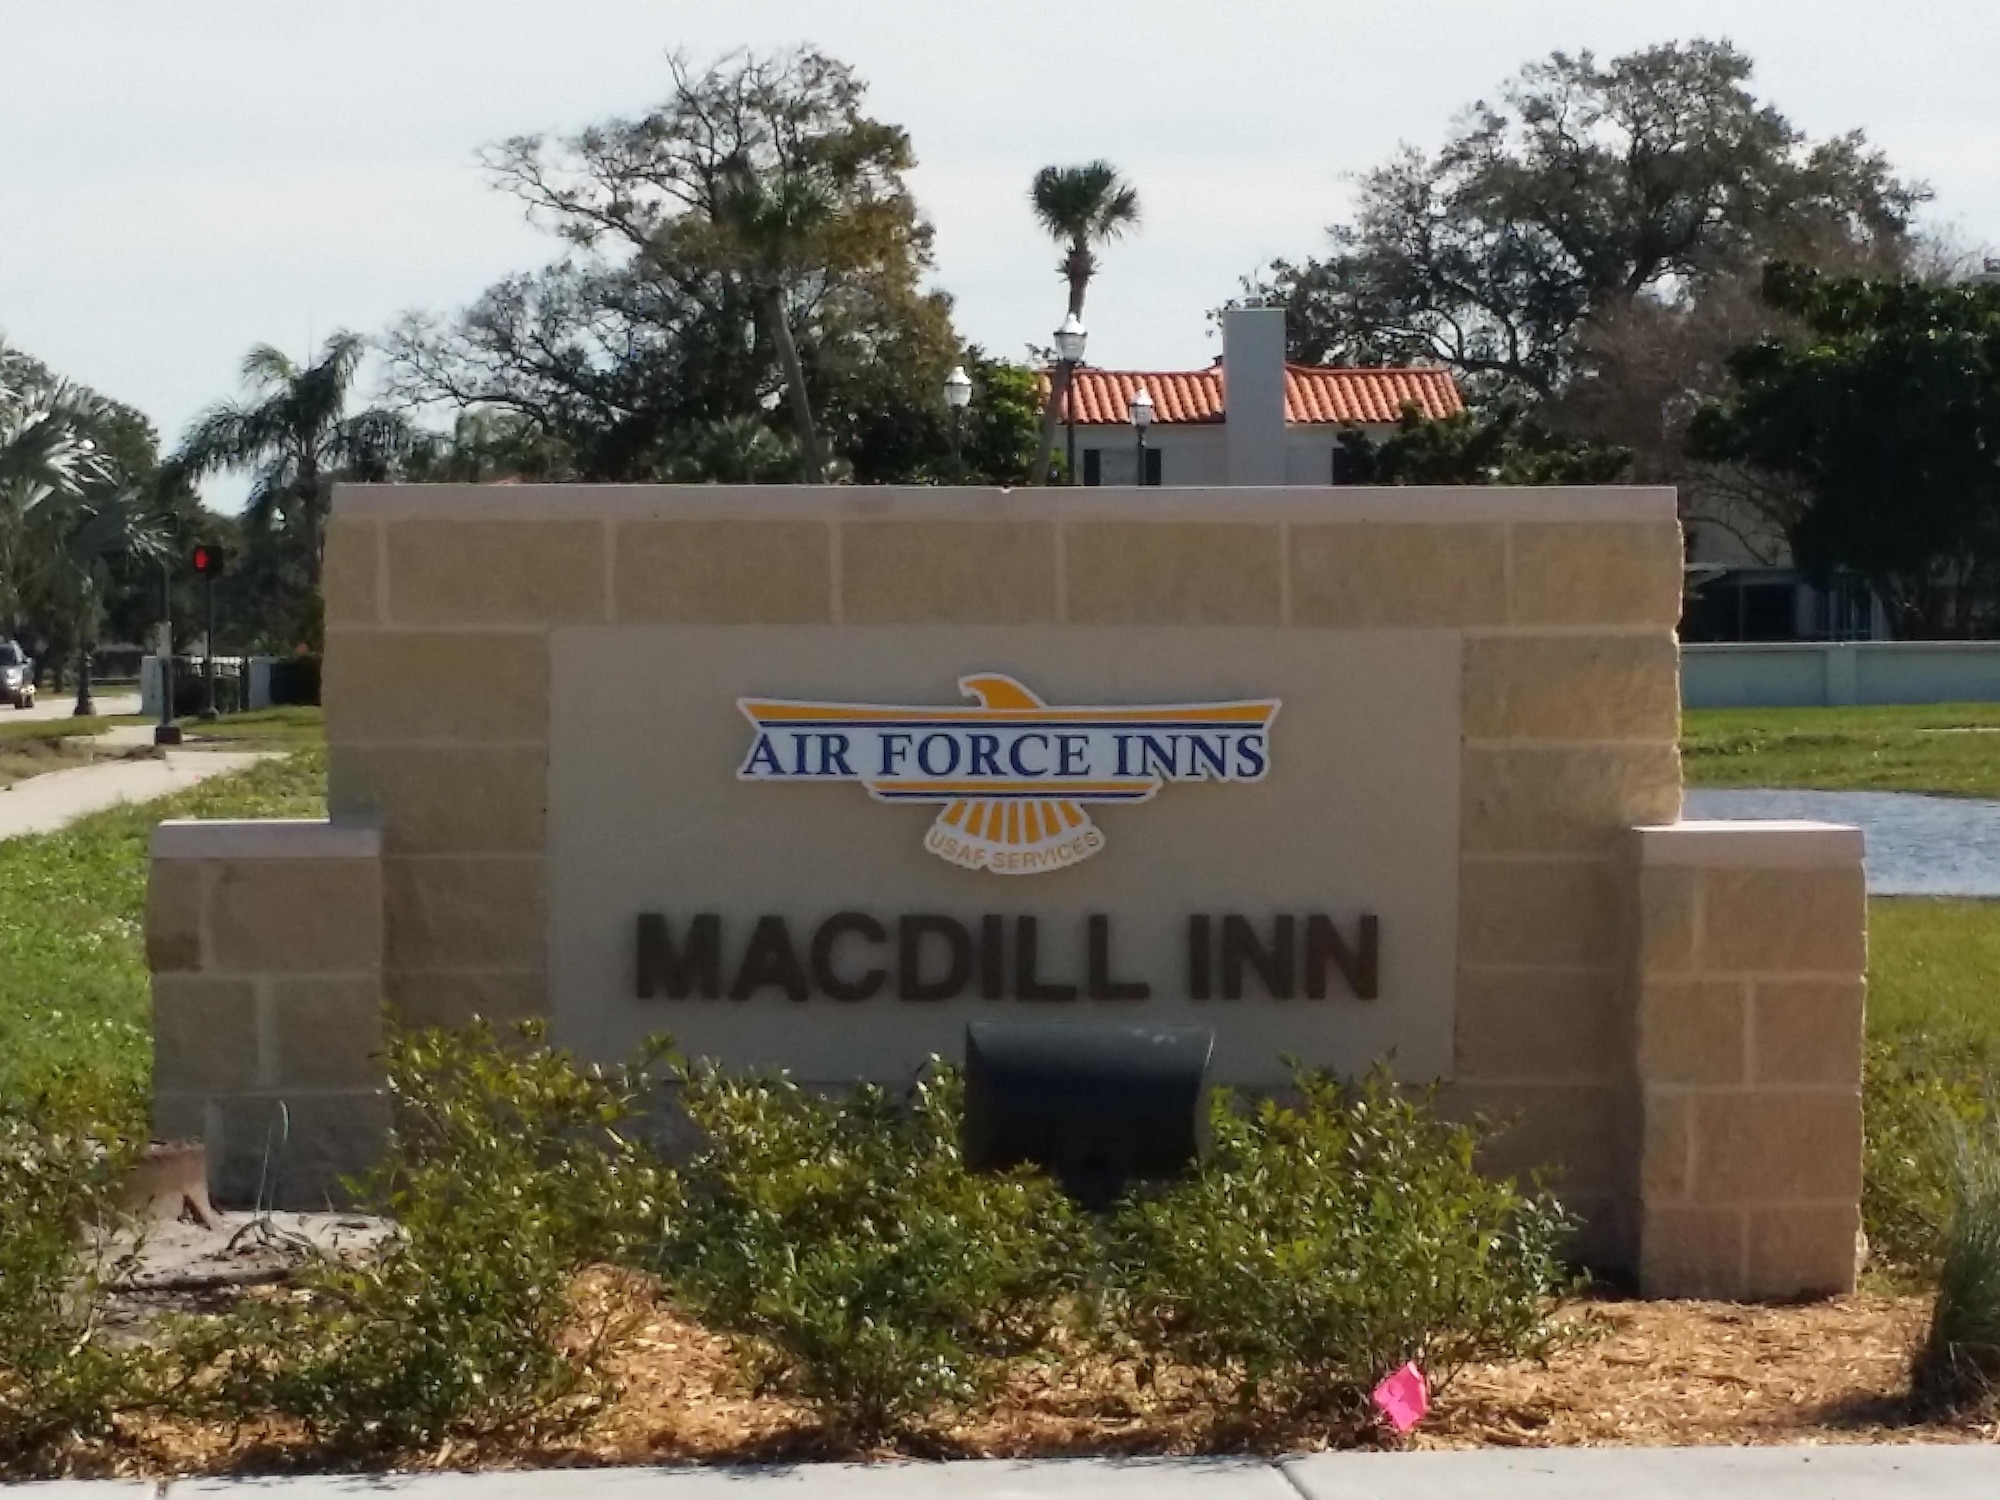 Air Force Inns is celebrating the grand opening of its new MacDill Inn at MacDill Air Force Base, Florida, May 2, 2016. (U.S. Air Force photo/Sherry A. Reed/Released)